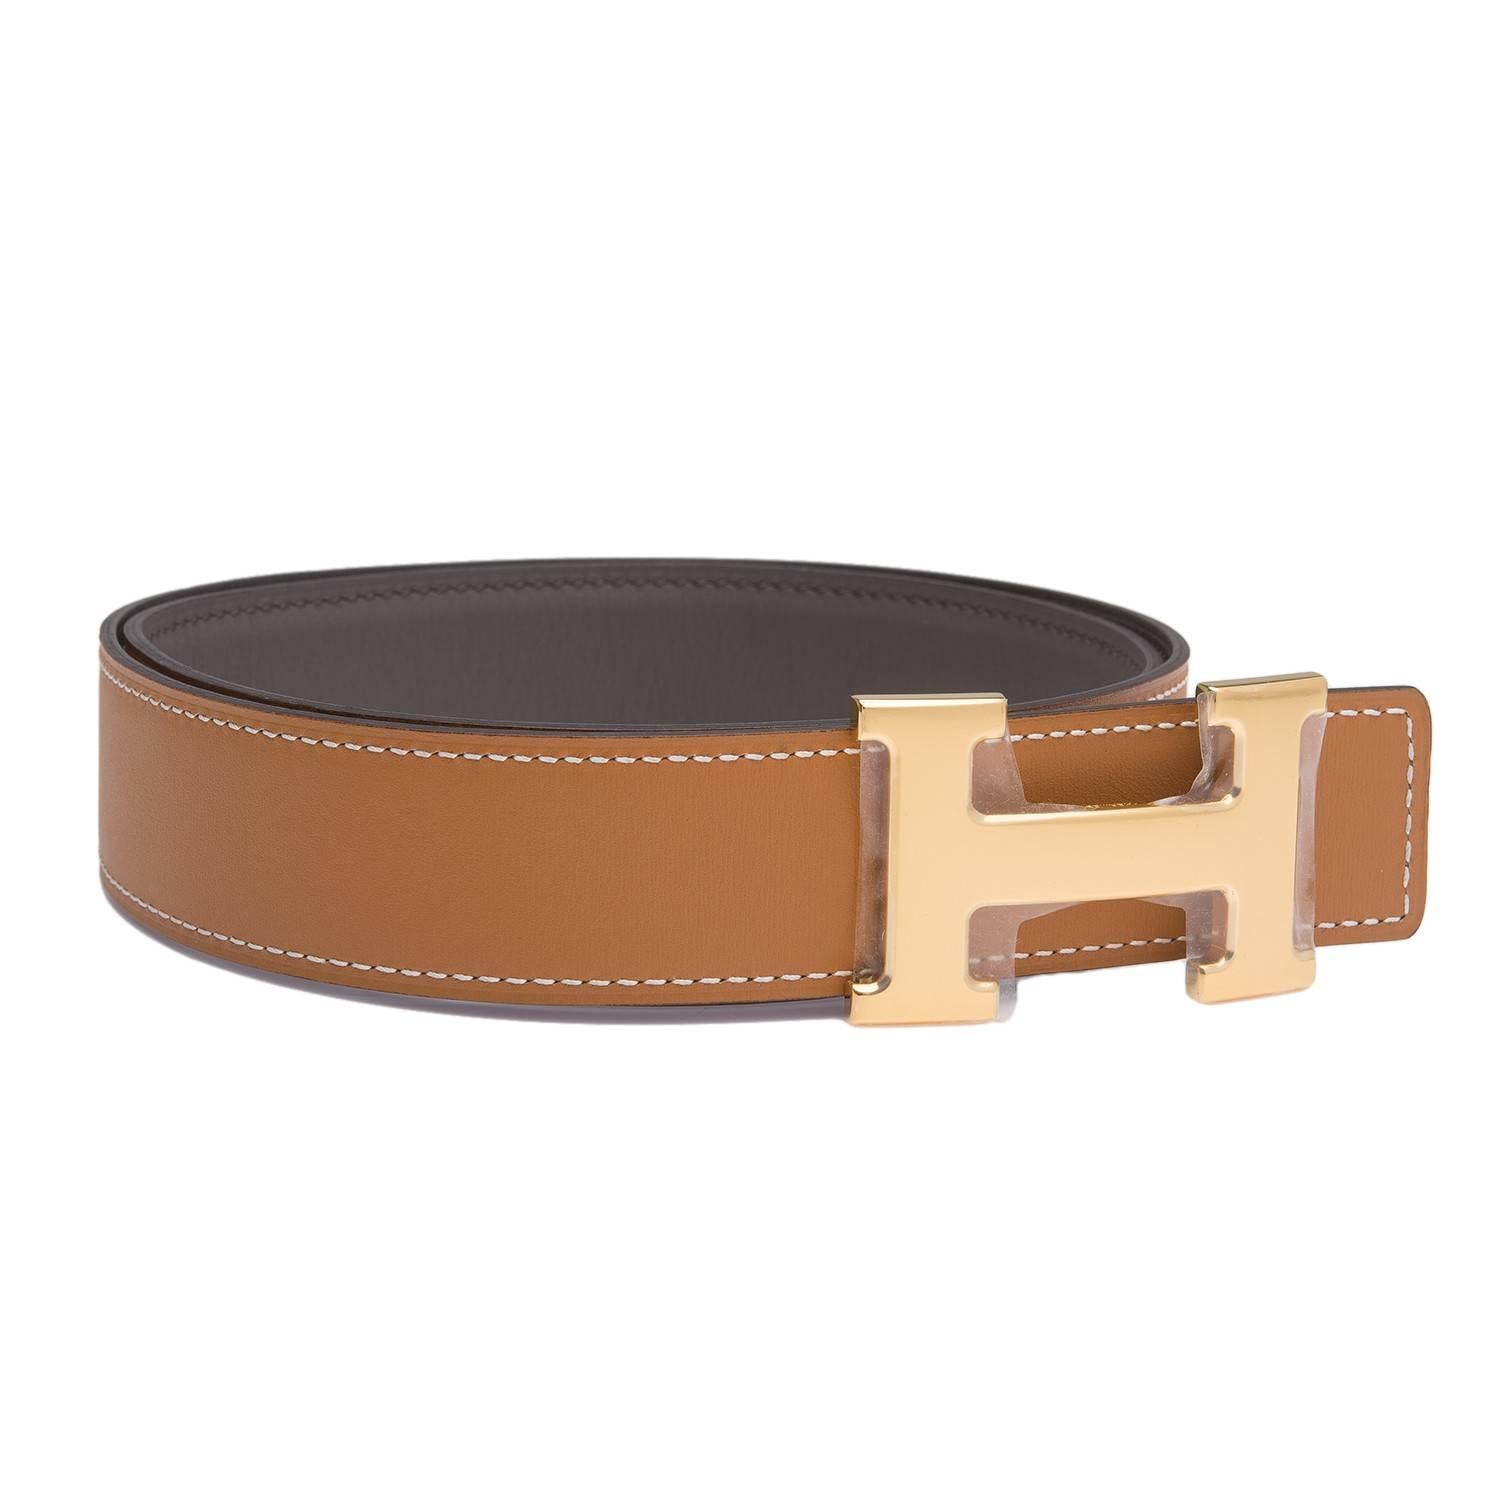 Hermes belt kit comprising an adjustable wide 32mm Constance H belt of Etain charmonix with tonal stitching reversing to Gold charmonix with contrast white stitching accompanied by a removable gold plated H buckle.

Origin: France
 
Condition: